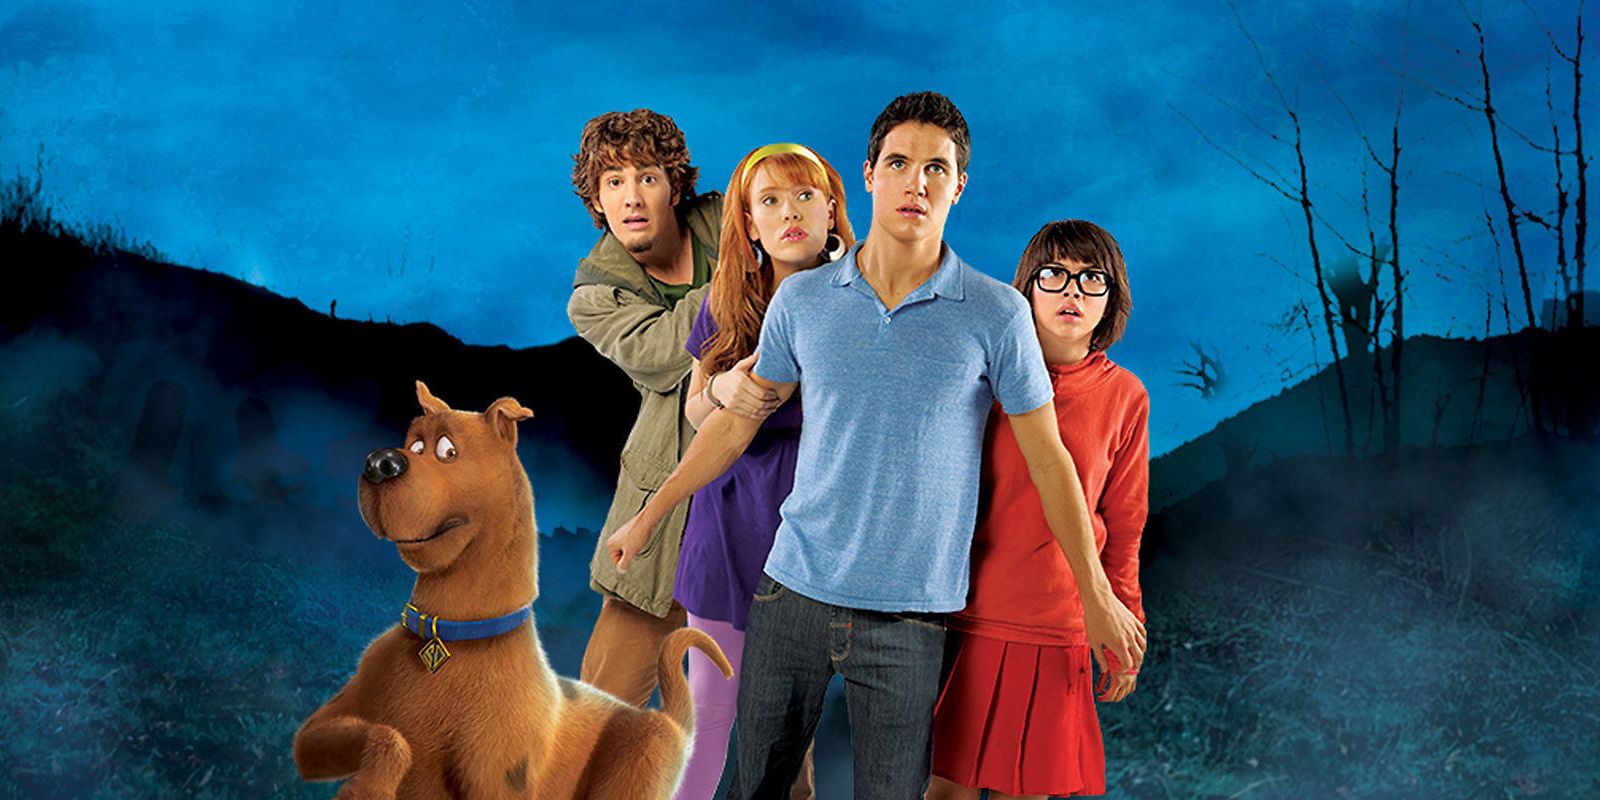 Younger versions of the Scooby gang are scared in Scooby-Doo: The Mystery Begins